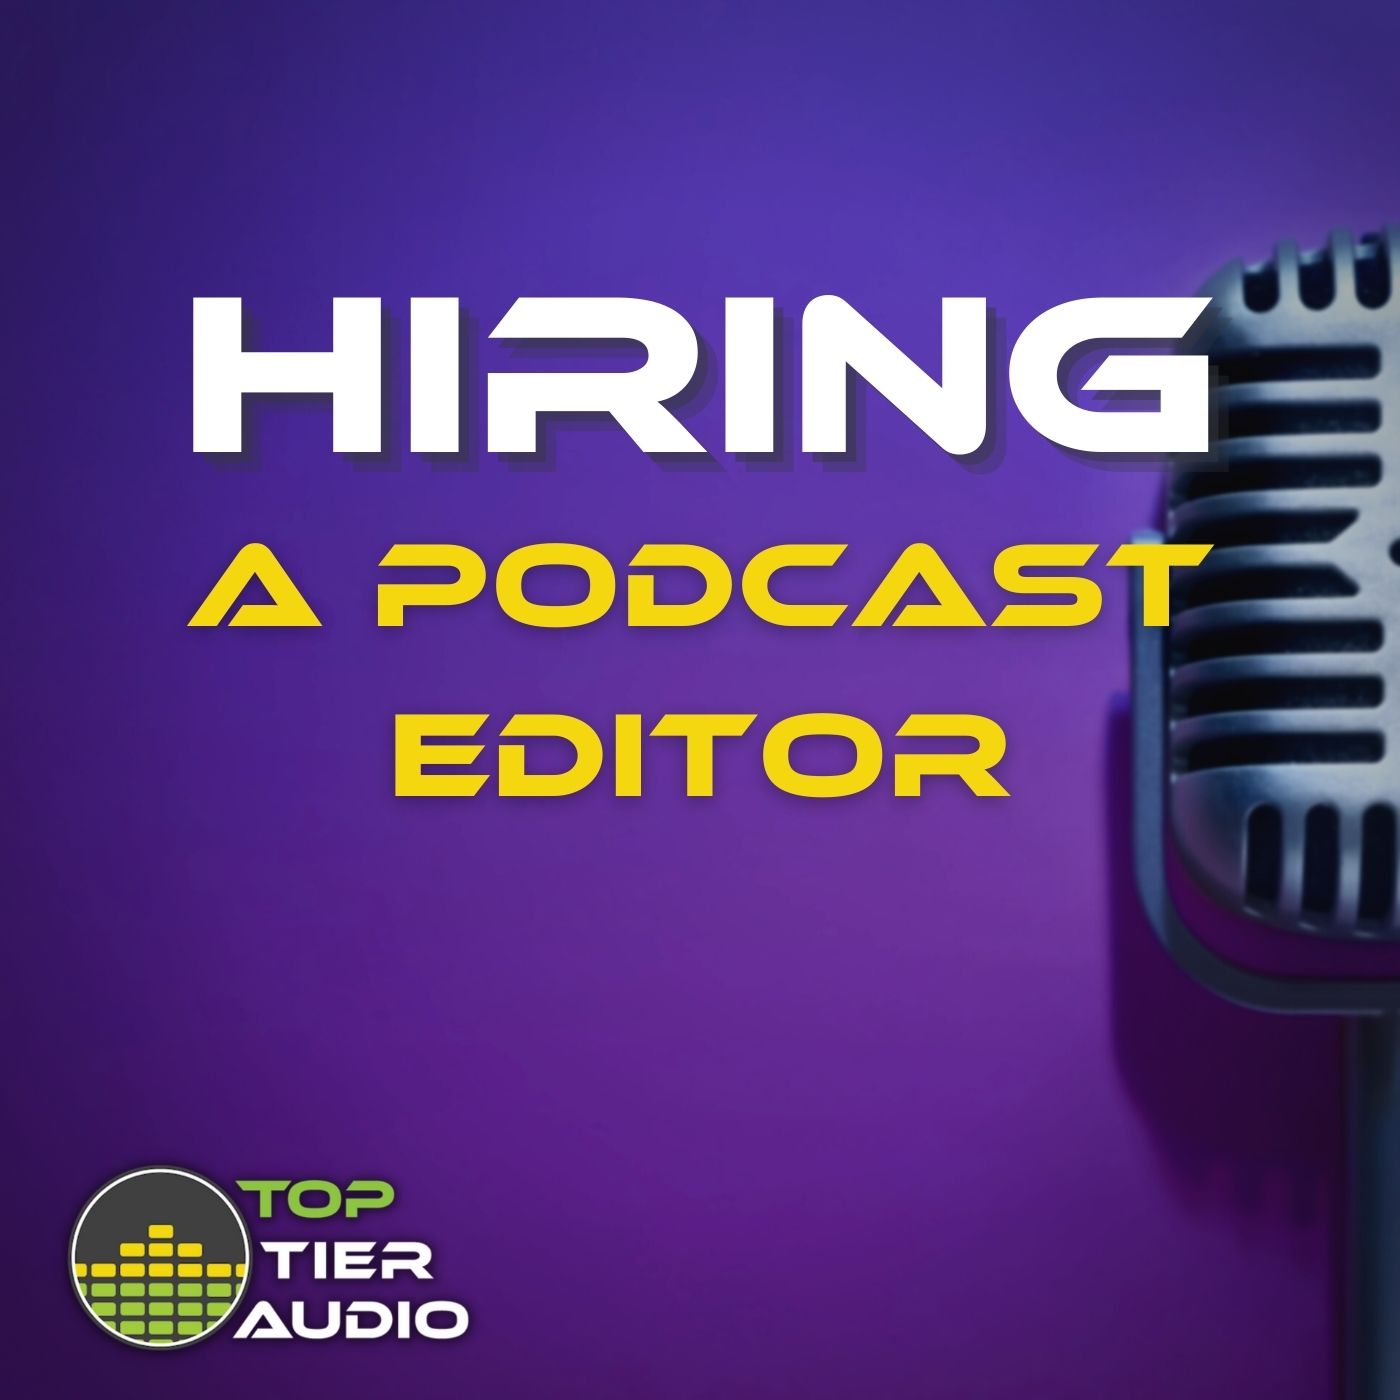 Artwork for Hiring a Podcast Editor